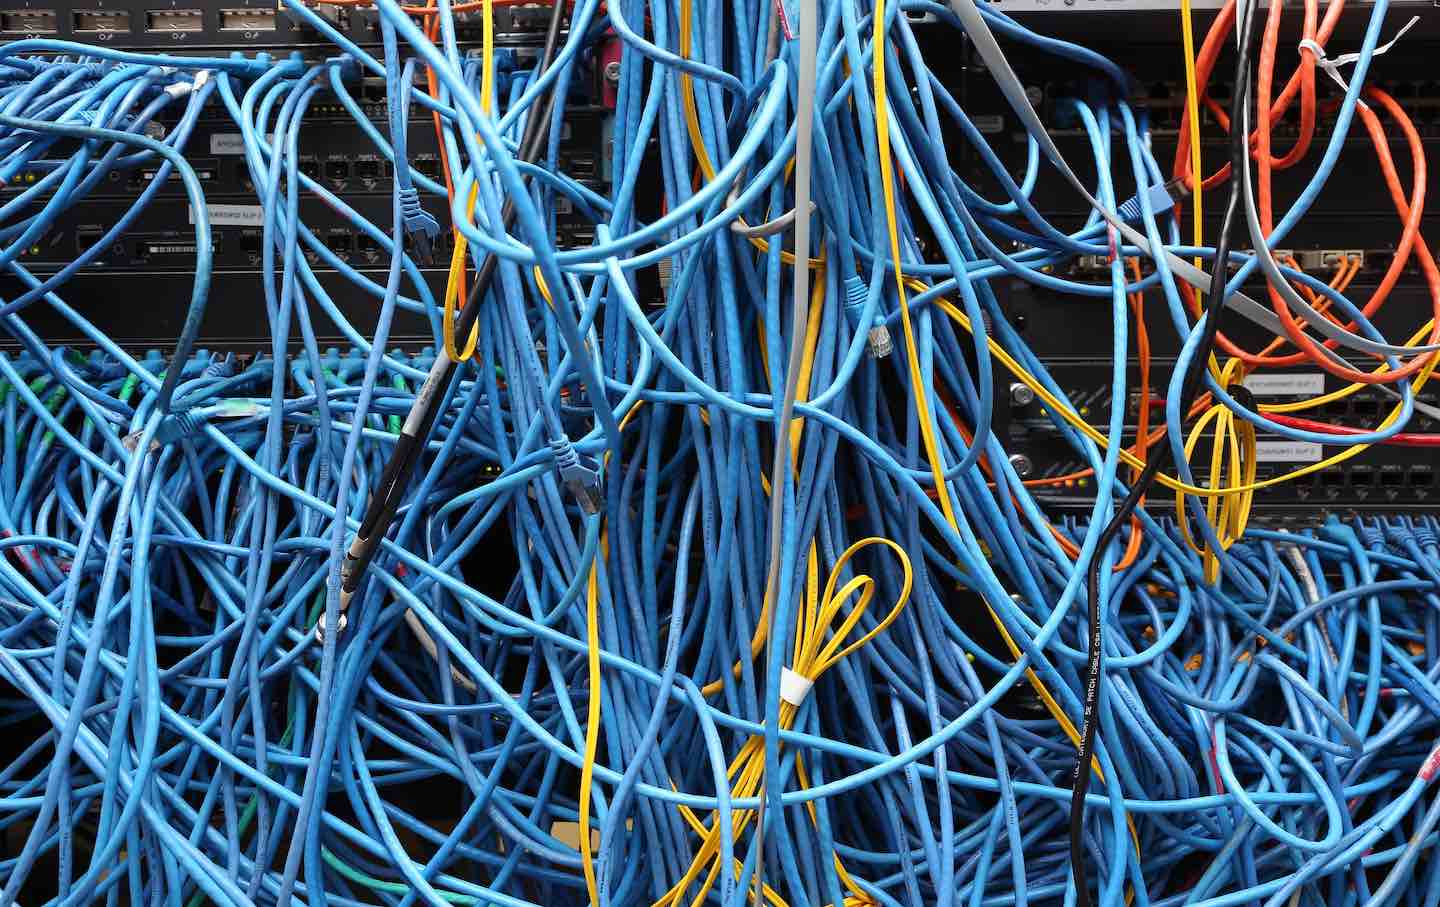 Network cables in a server room in New York City, 2014.